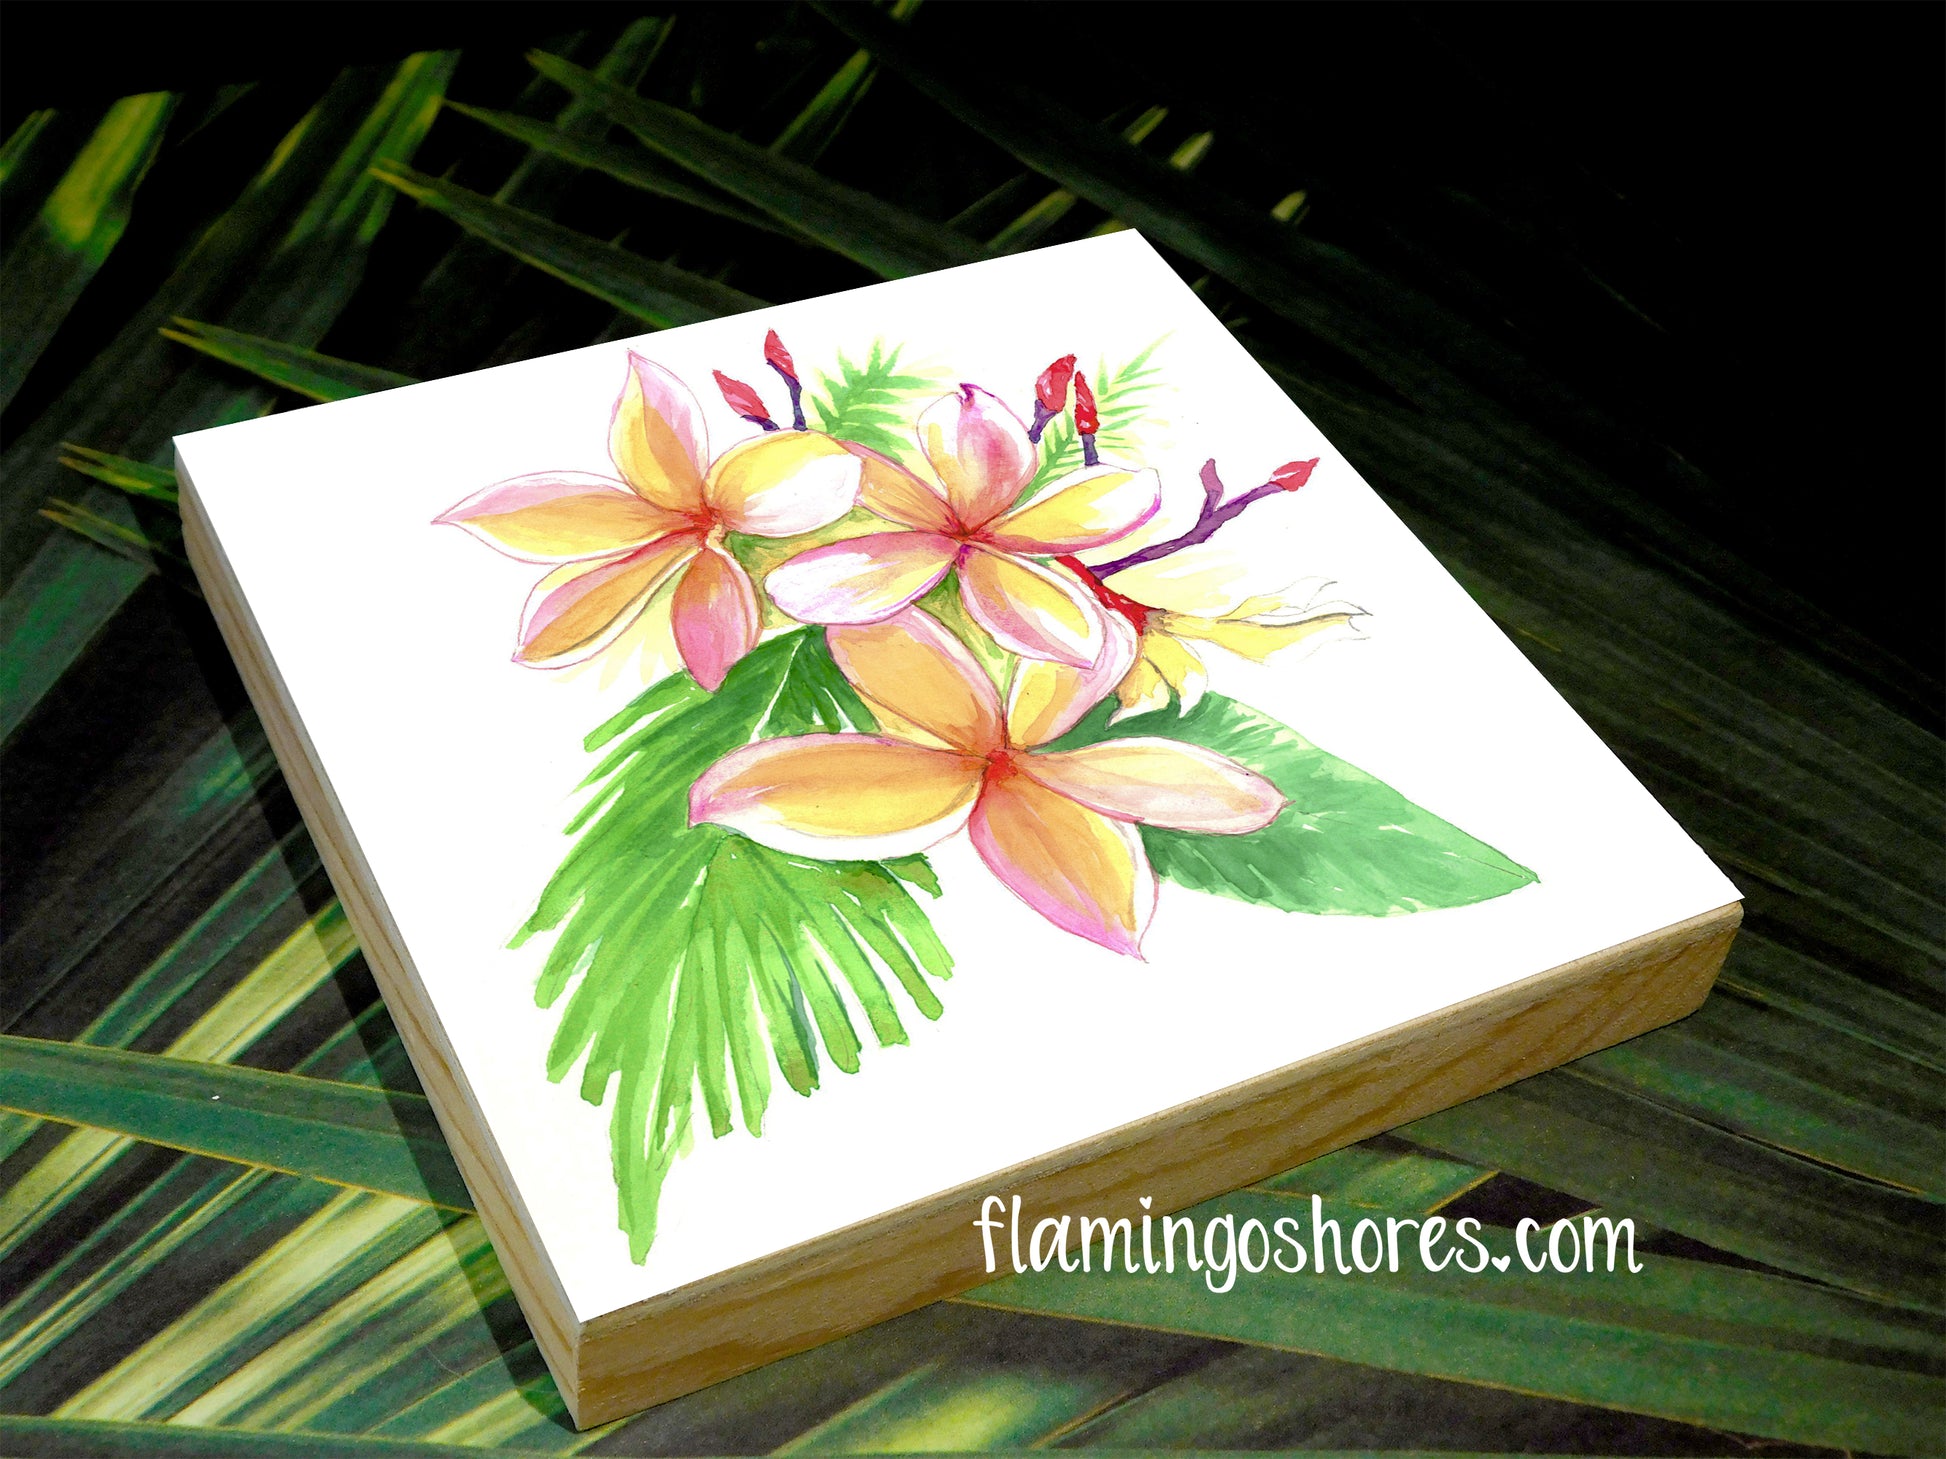 Plumeria Tropical Flower Watercolor Print on Wood Block - Flamingo Shores - Original Art for Home Decor and Gifts